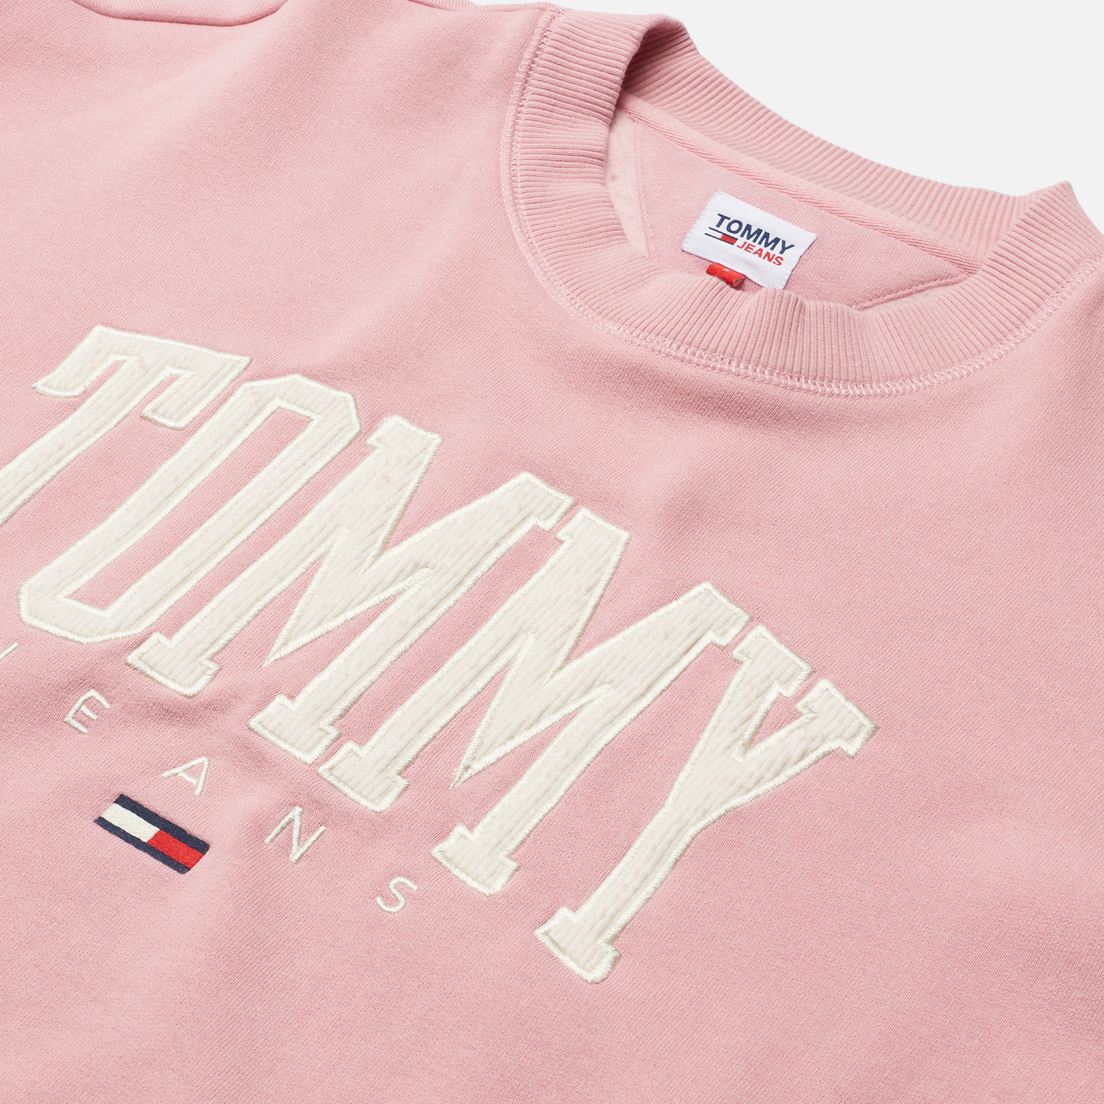 Tommy Jeans